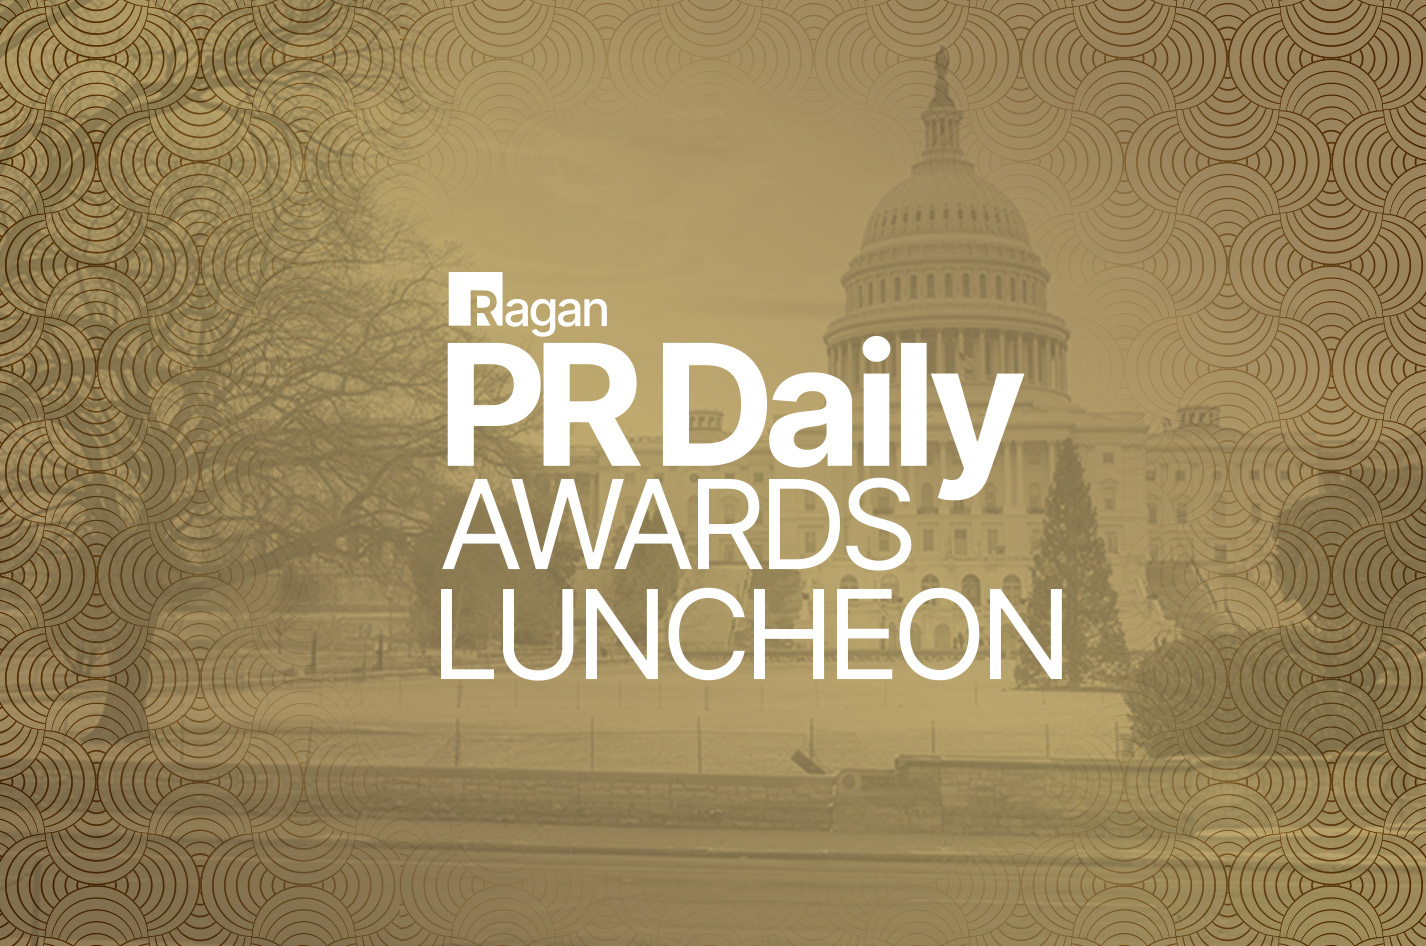 PR Daily Awards Luncheon